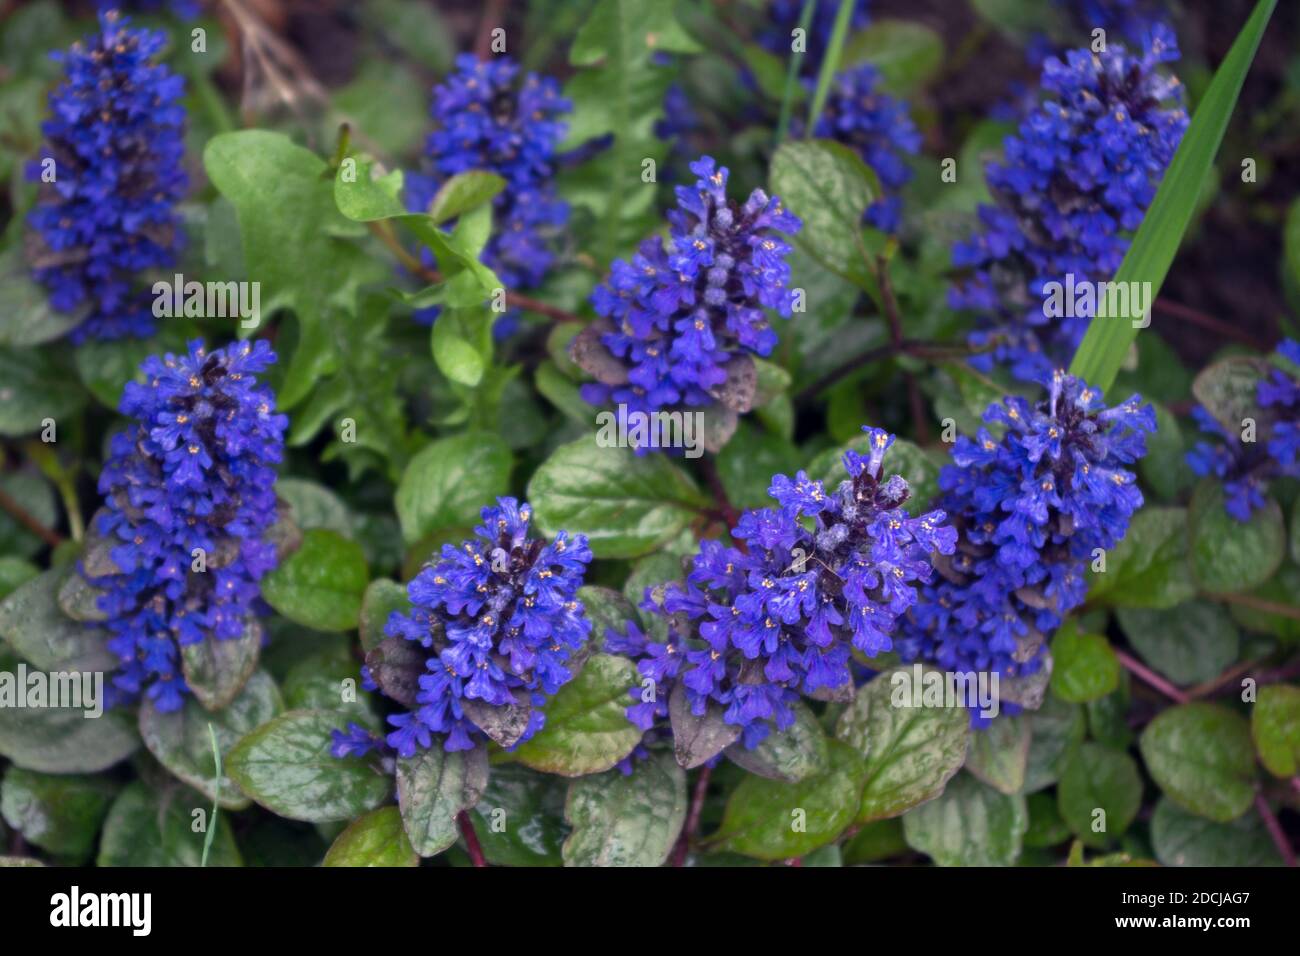 Violet-blue flowers (Ajuga reptans) collected in spike-shaped inflorescences with oval green leaves in the garden, top view Stock Photo